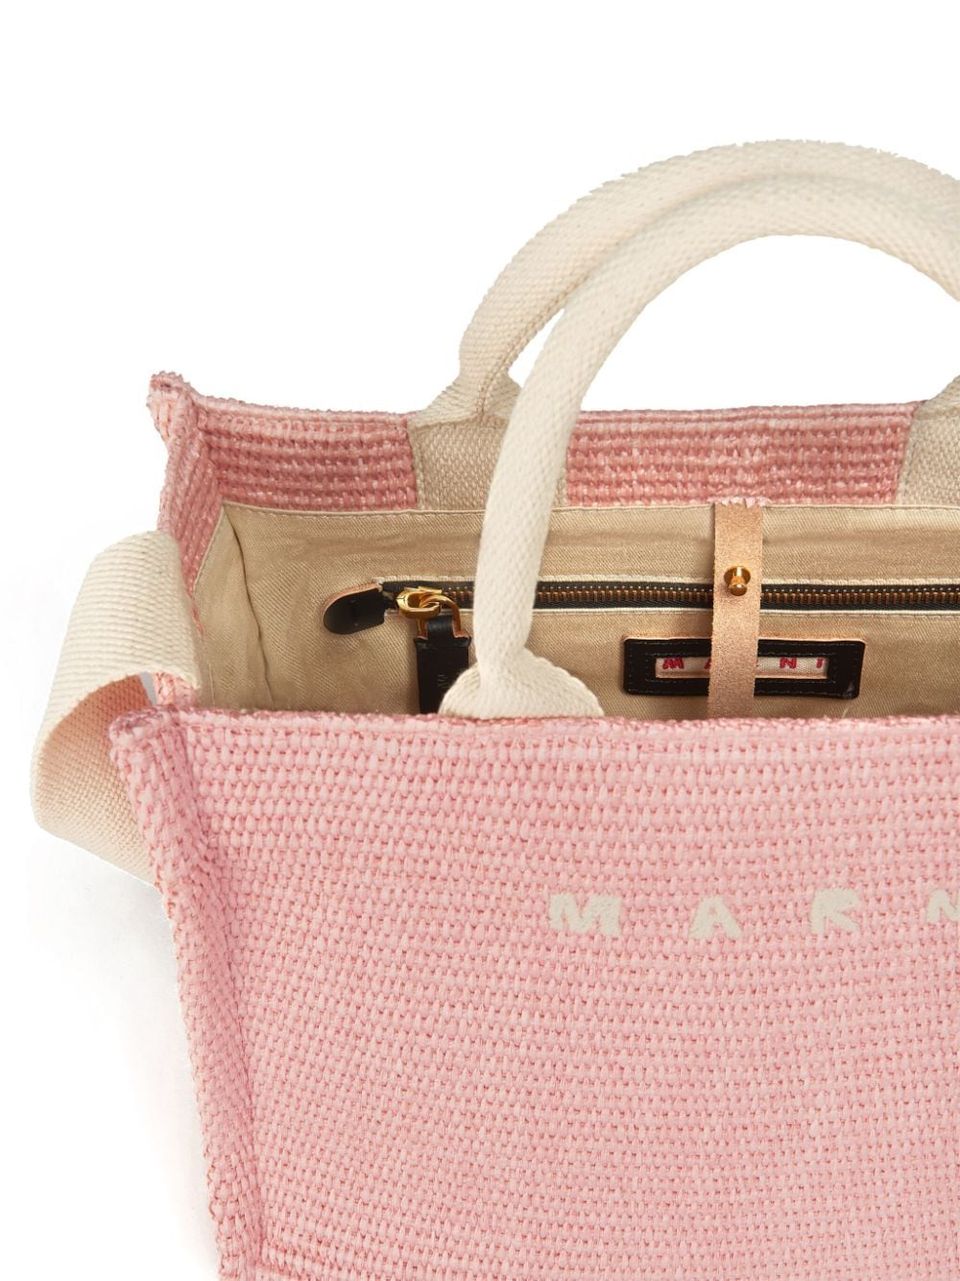 Small Tote bag in fabric with raffia effect